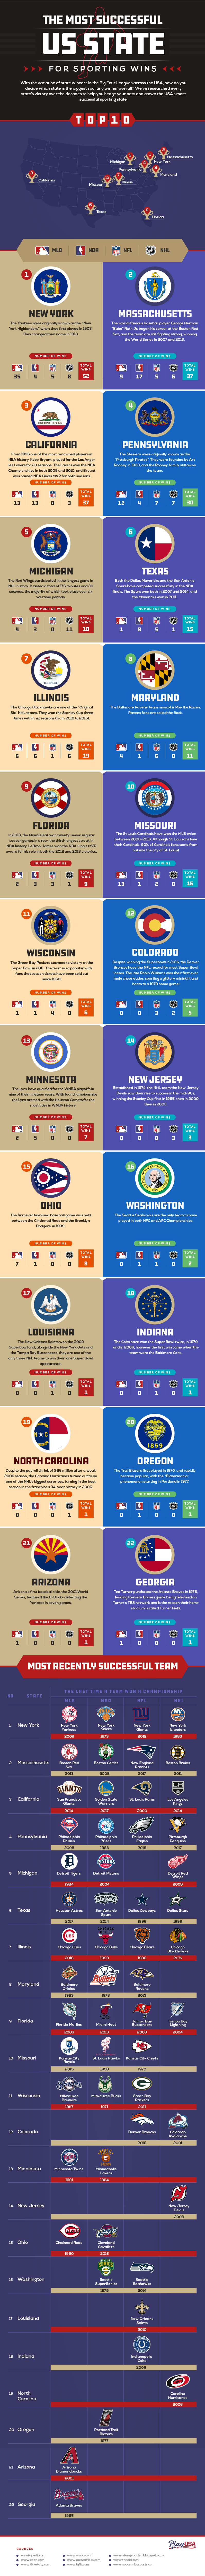 The Most Successful US State For Sporting Wins infographic